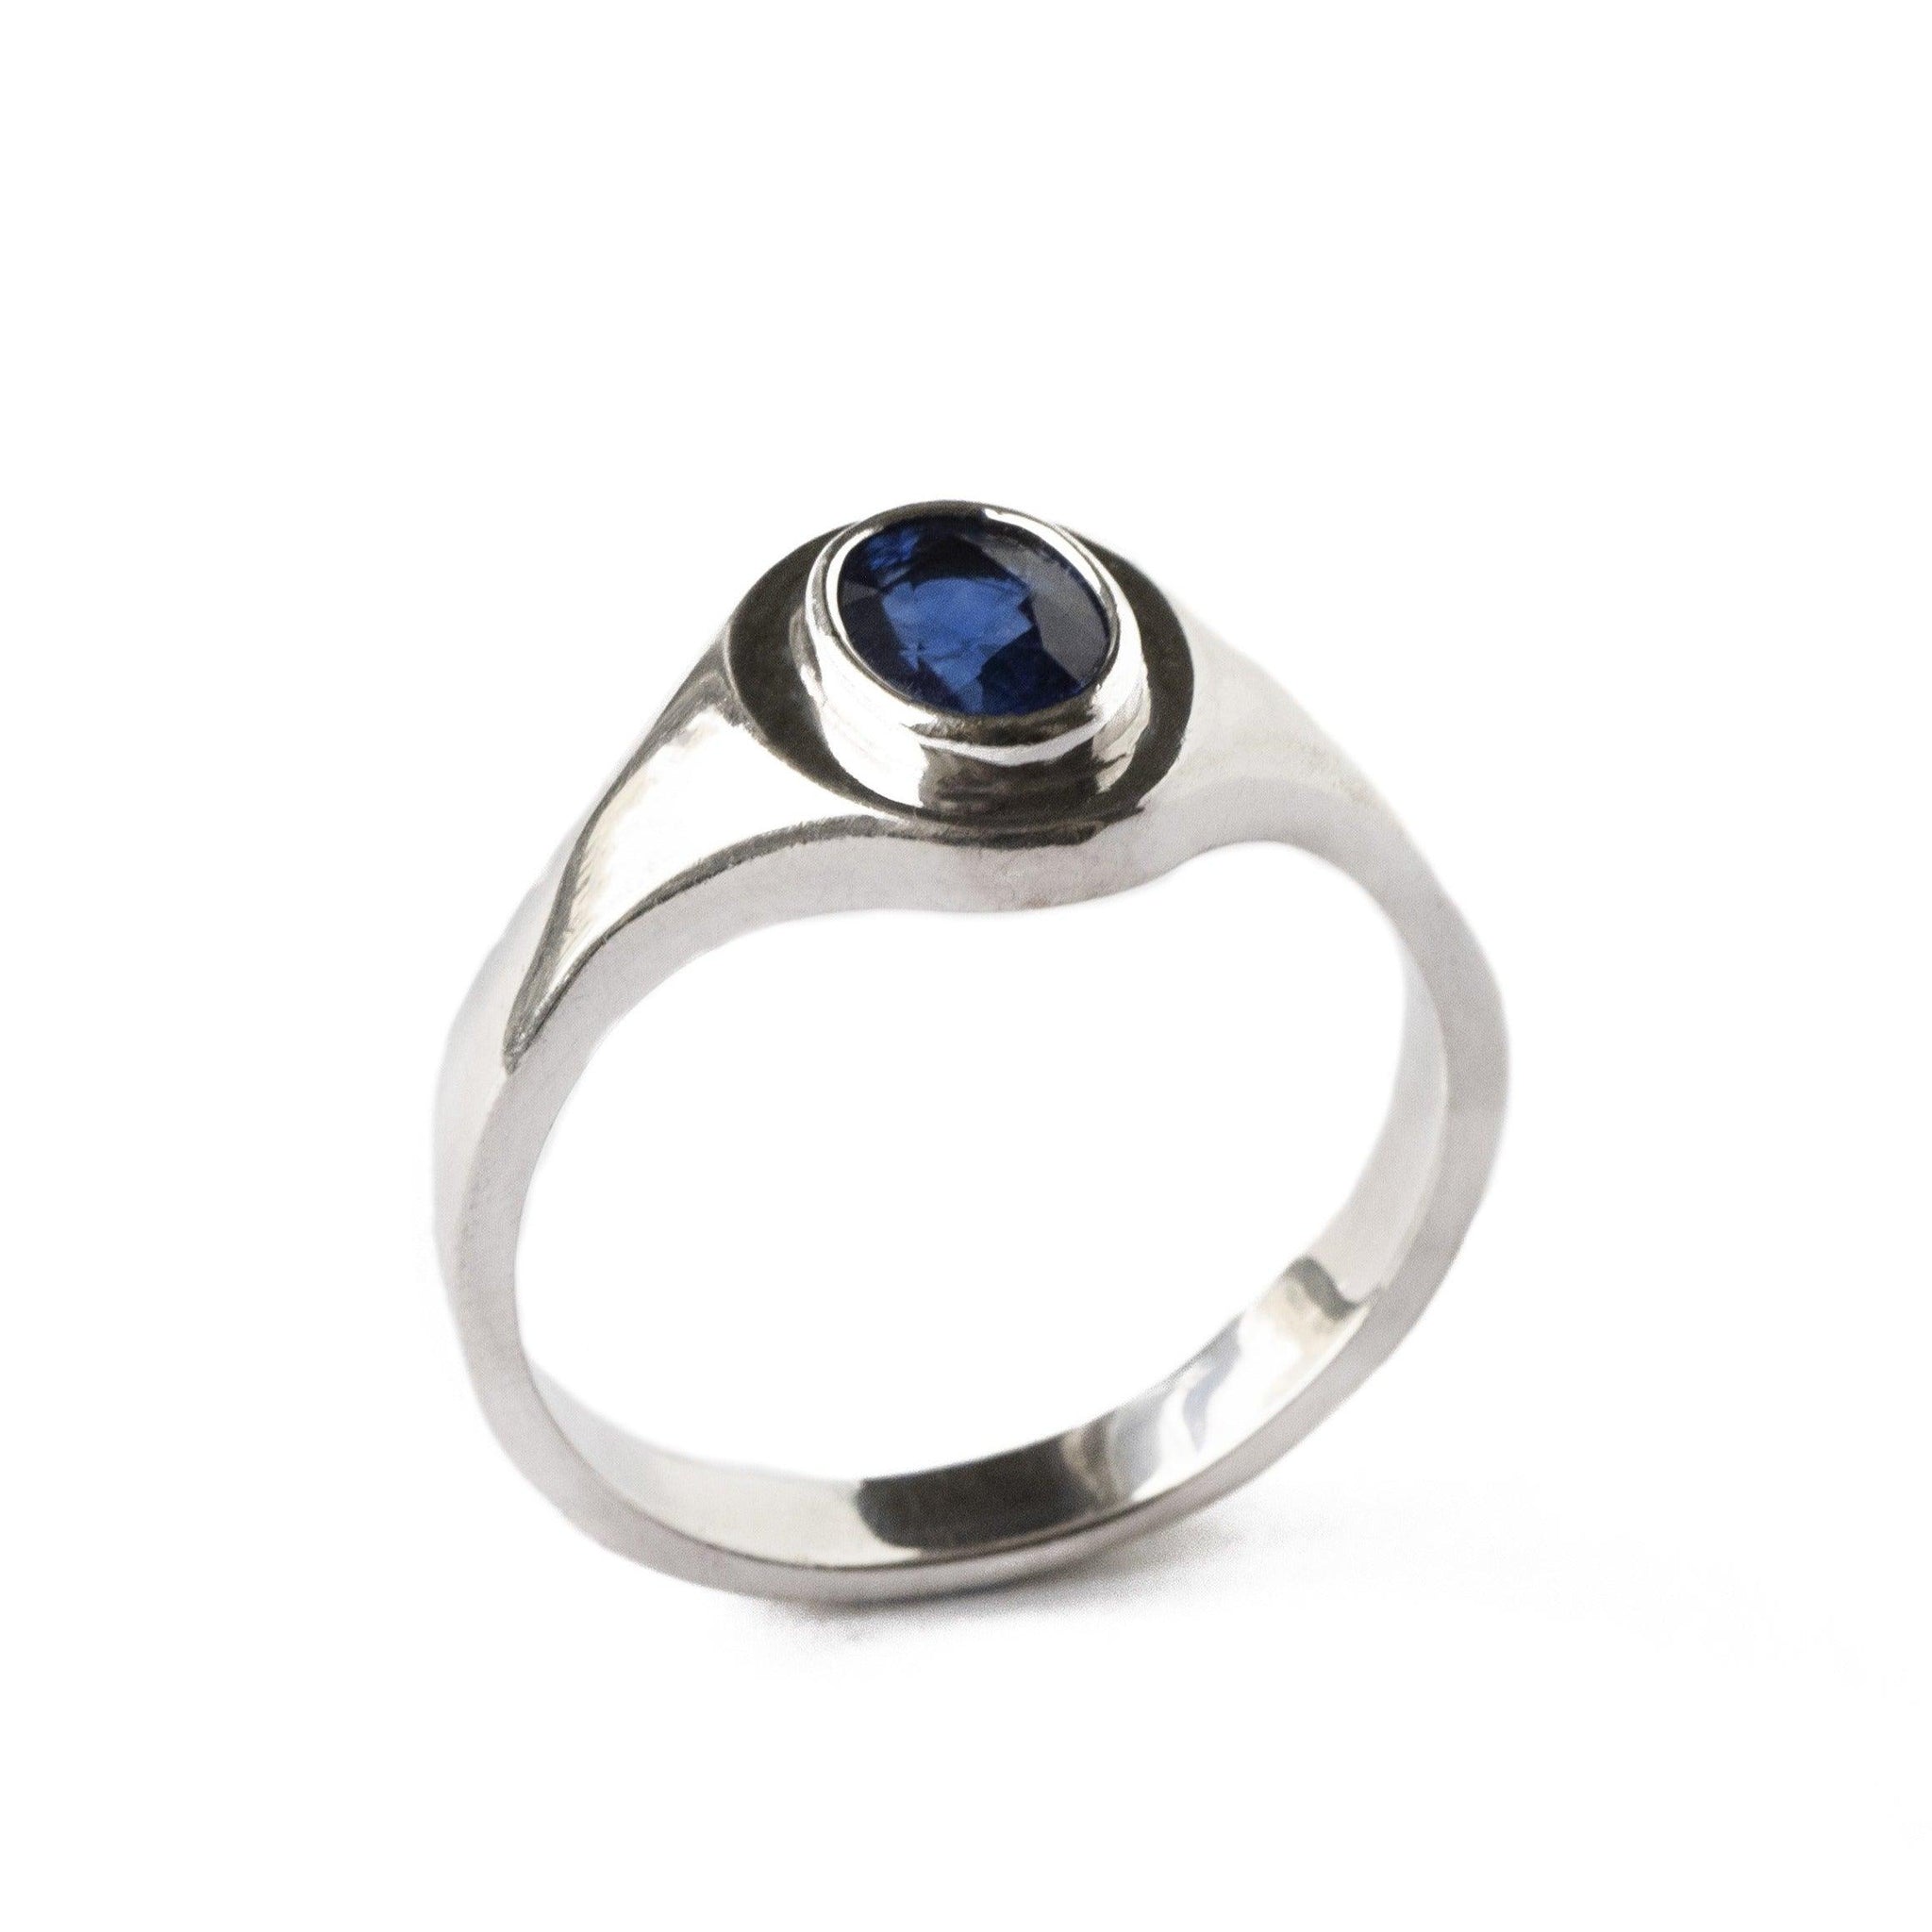 18ct White Gold Gents Blue Sapphire Ring GR-4951